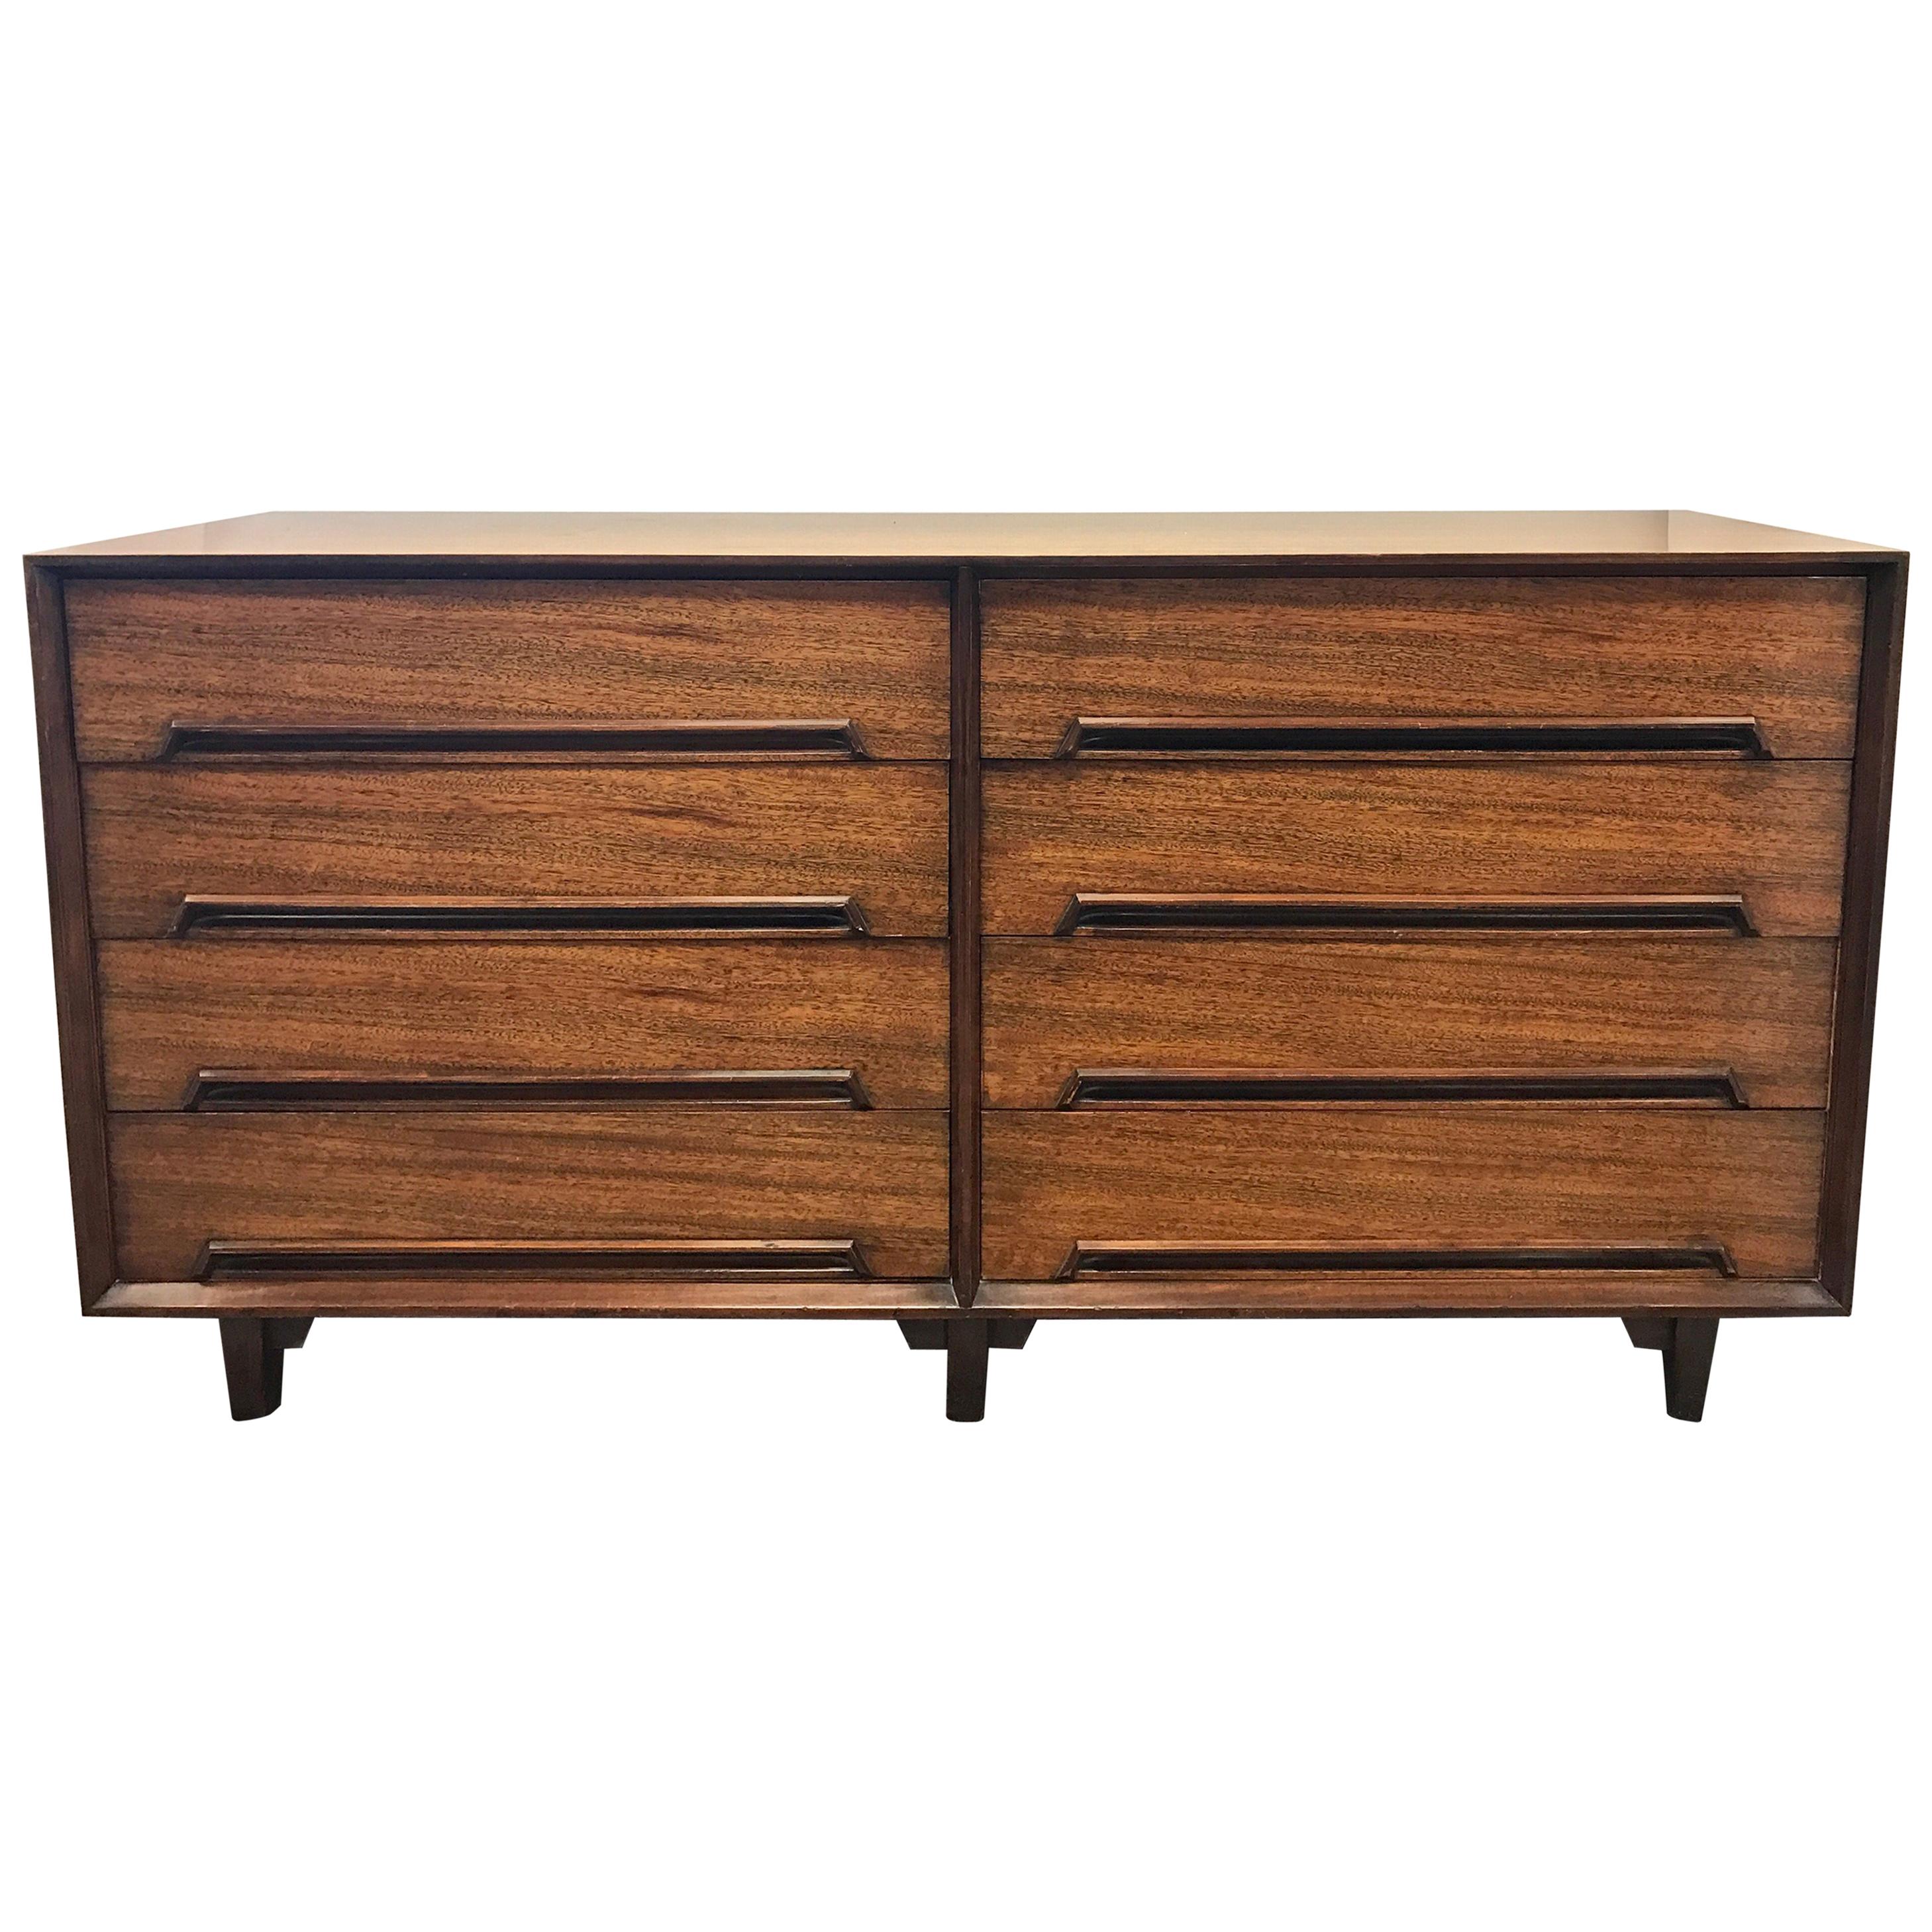 Milo Baughman for Drexel perspective mahogany and rosewood three-piece bedroom set includes a tall five-drawer chest of drawers. Measures: H 45 in x W 42 in x D 19
Large eight-drawer double dresser H 32 in x W 63 in x D 19 in
Full size headboard